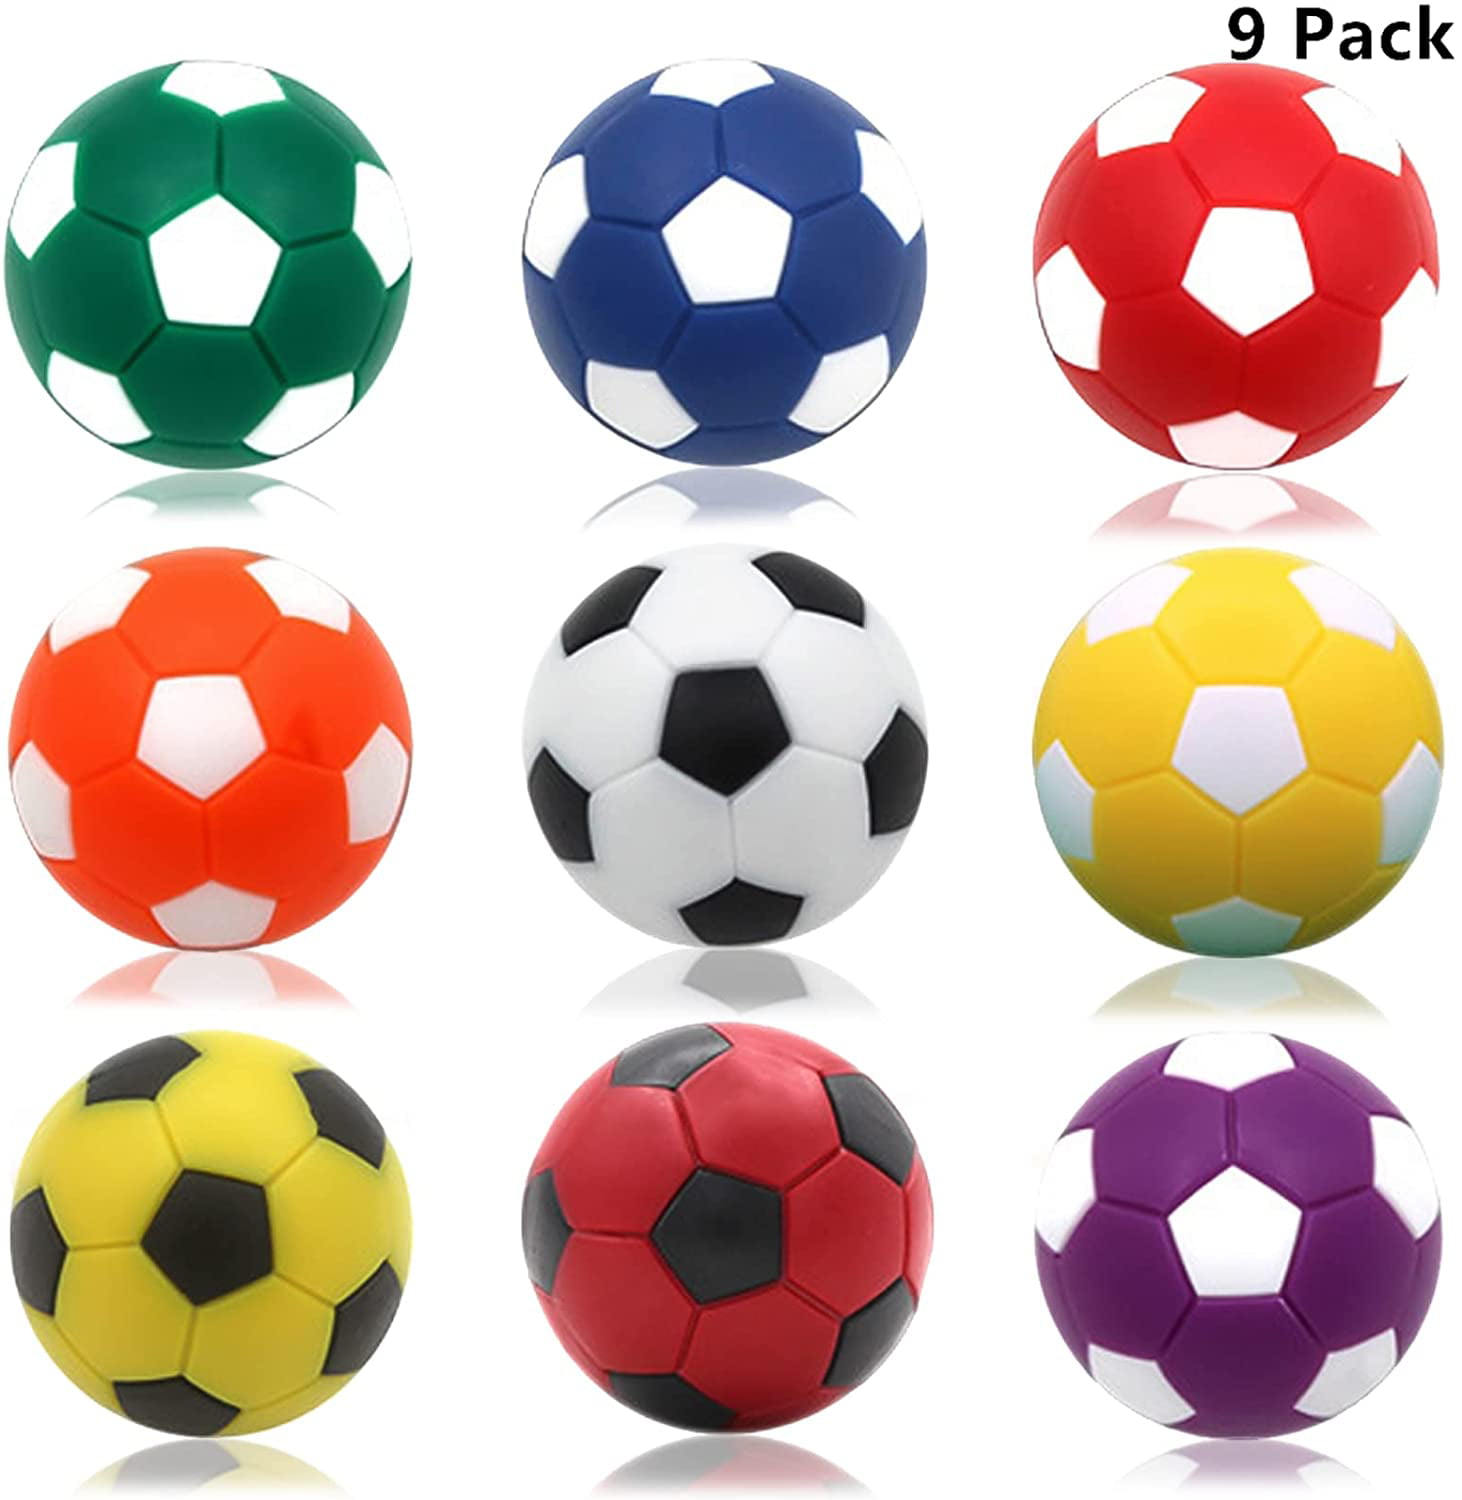 Durable Foosball Replacement Soccer Game Accessories for for 1.4M Table Football 